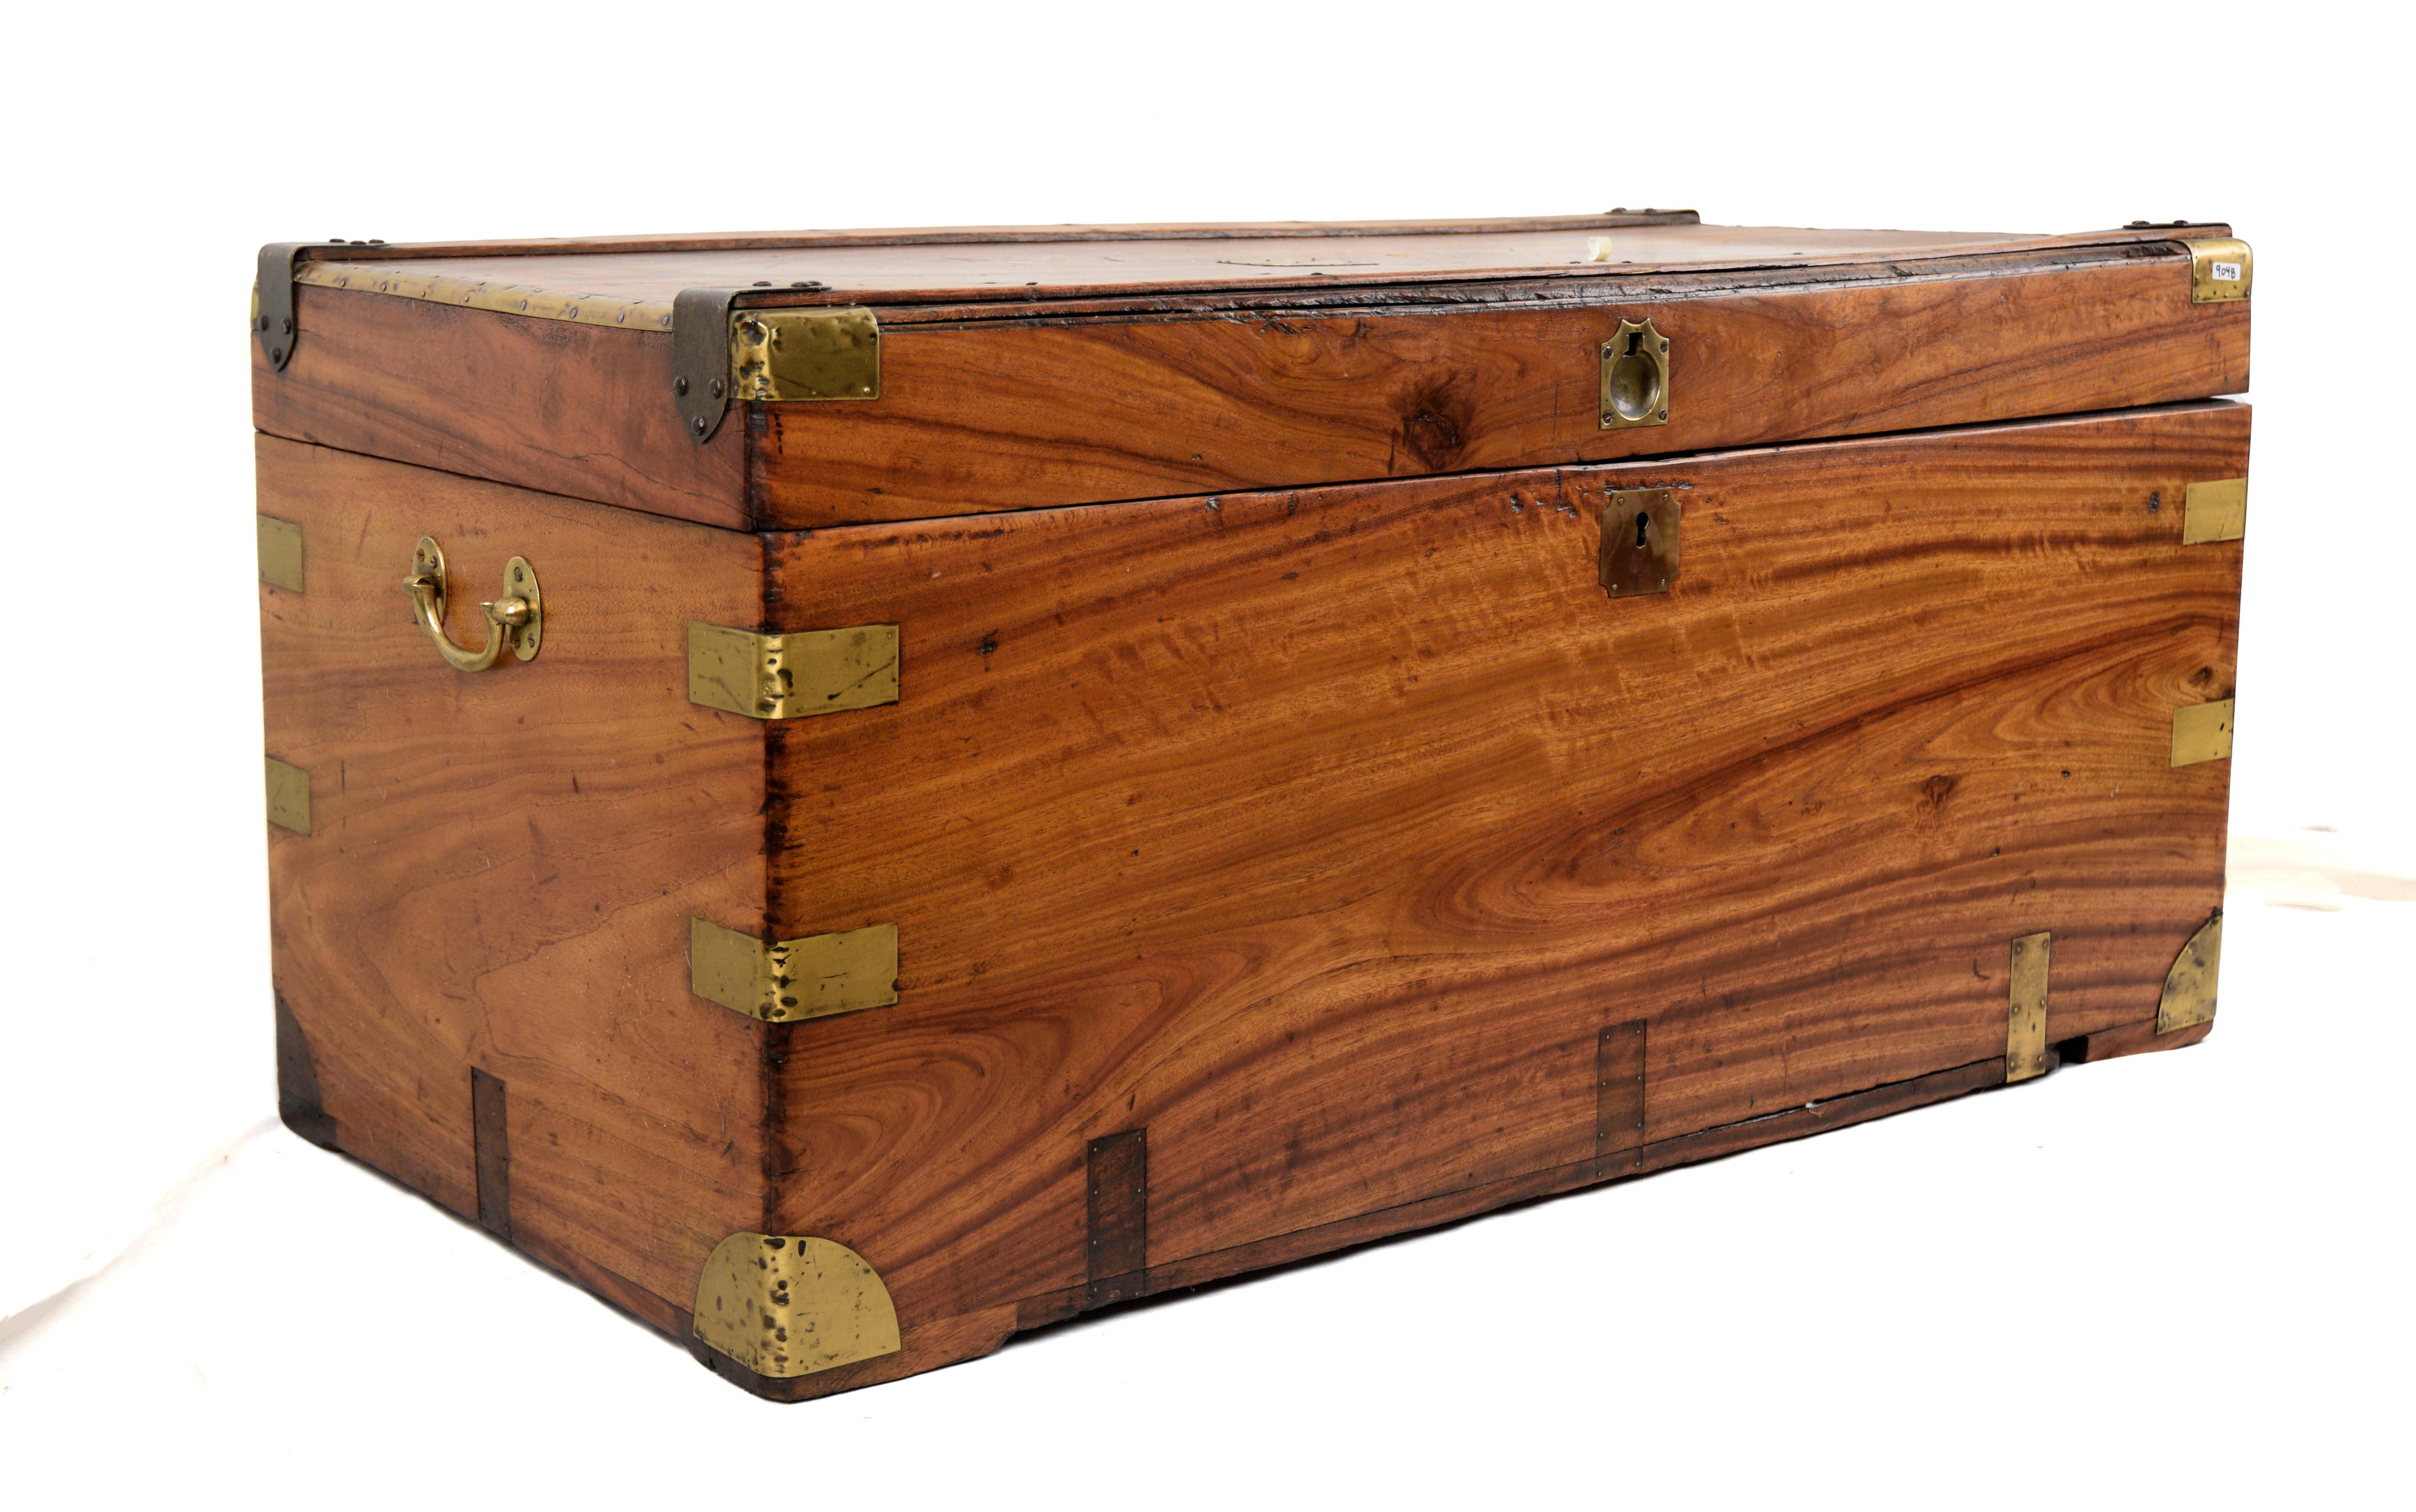 Camphorwood Campaign Chest - Late 19th Century Chinese Export Case (Medium)

This hardwood chest has brass hardware, including handles. It has a brass plaque on the top that has been inscribed with the owner's name,  R. B. Van Cleave, but this one